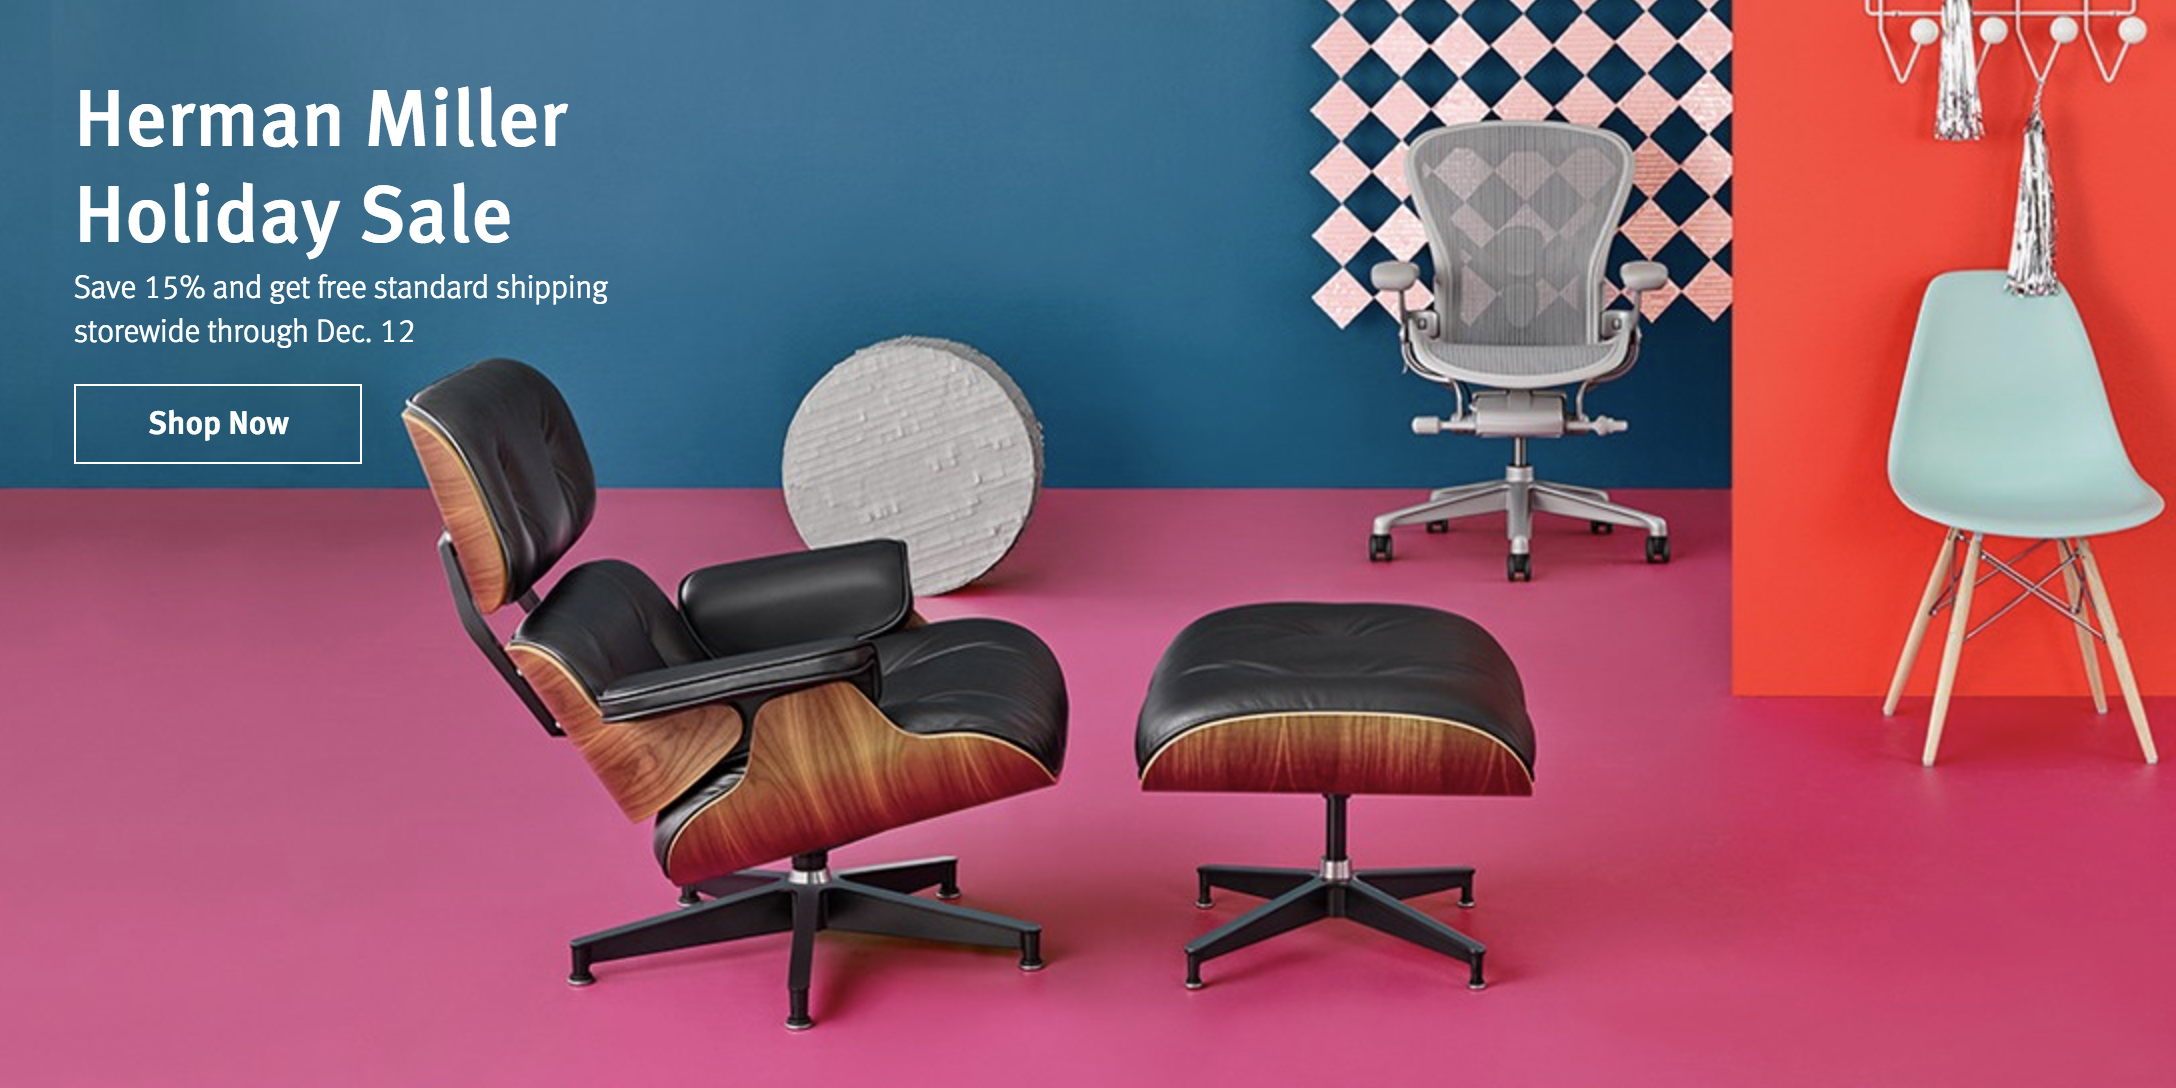 Herman Miller Annual Holiday Sale 15 off iconic styles plus free